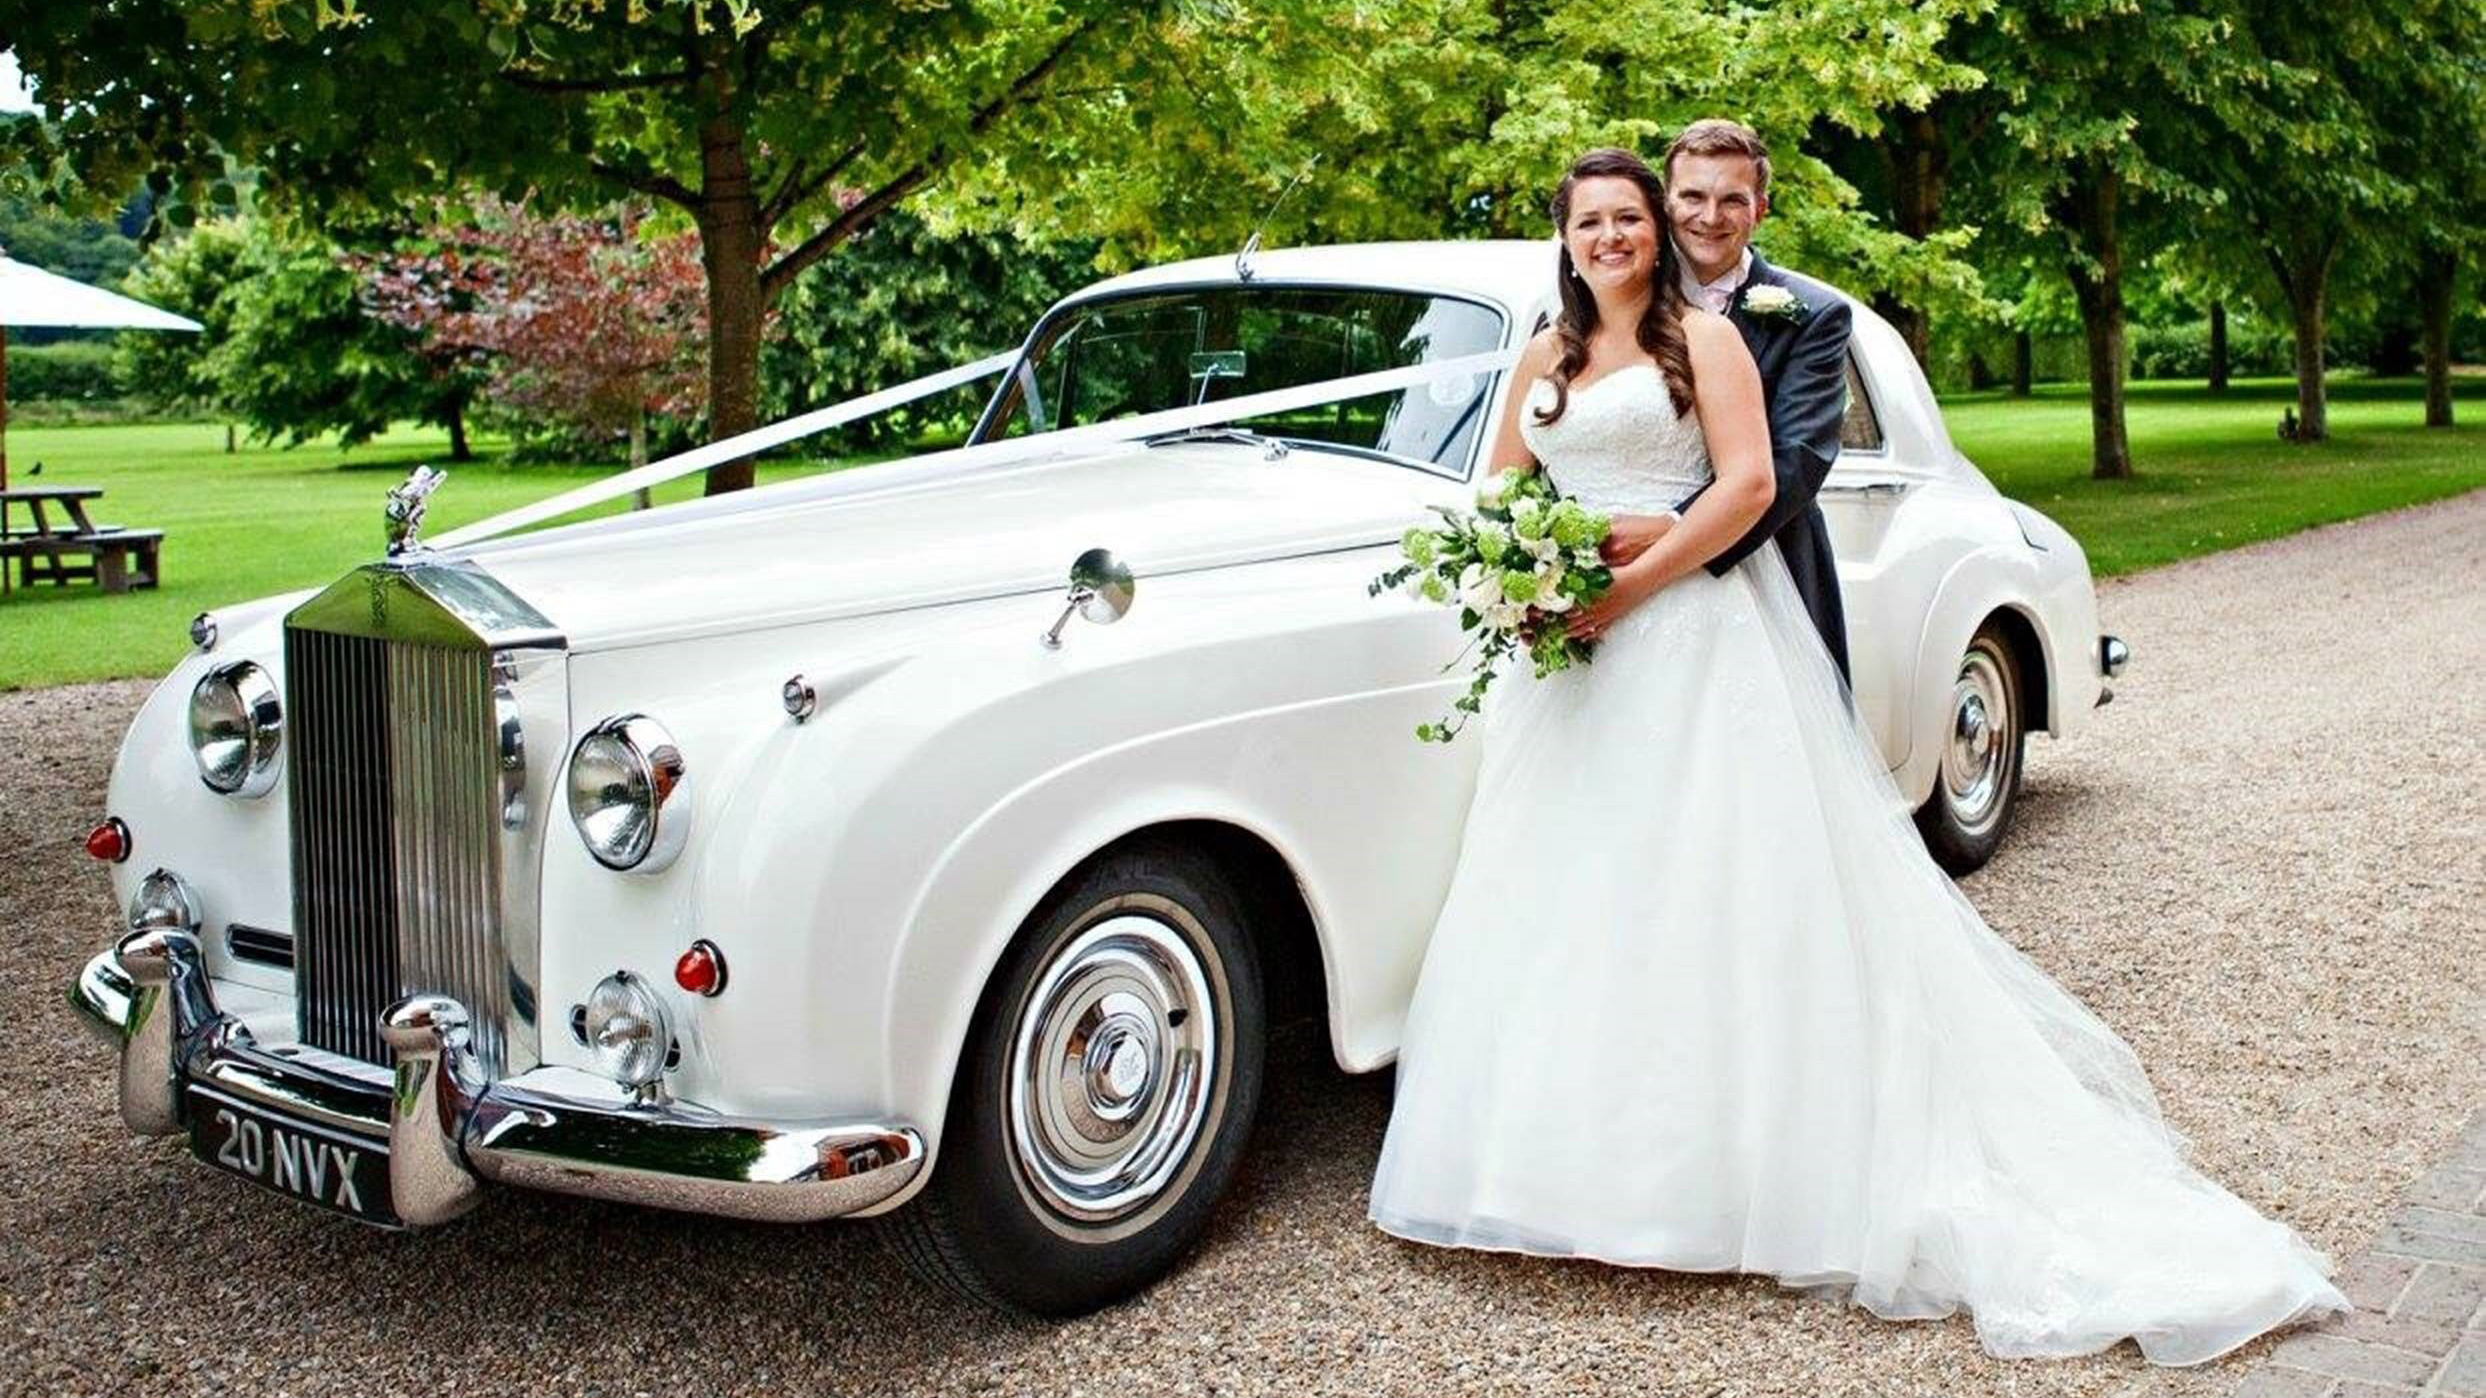 White Rolls-Royce Silver cloud decorated with ivory ribbons parked in the entrance of a wedding venue in Luton. Bride and Groom are standing by the vehicle. Groom is holding his Bride in his arms while she holds her bridal bouquet.